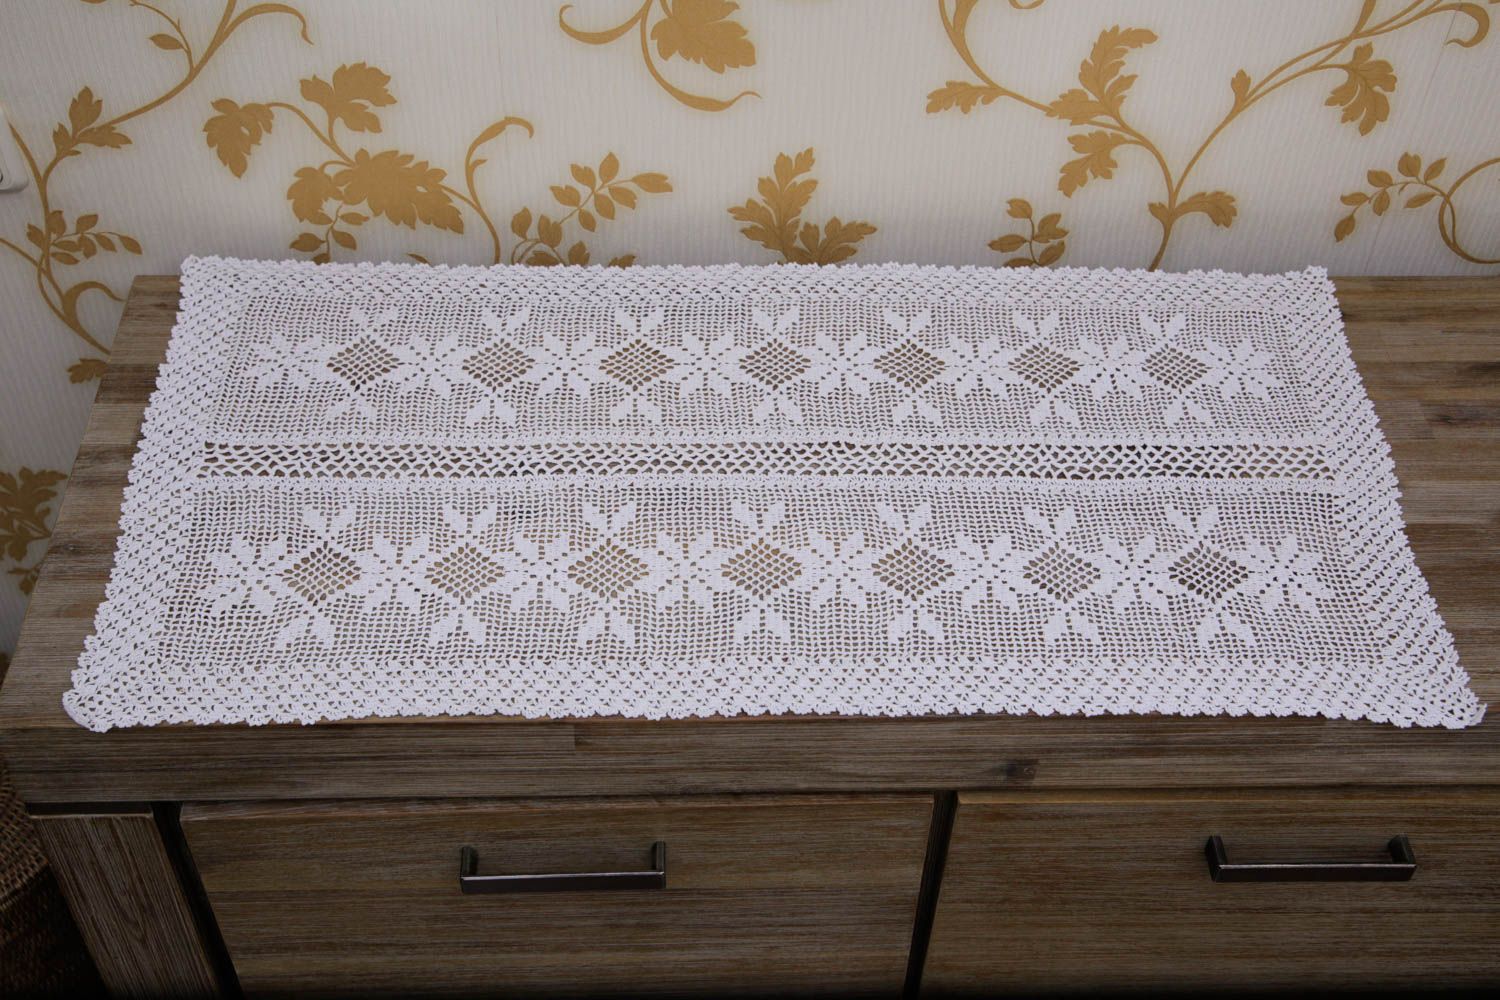 Table runner cloth runner table decoration runner for table home textiles photo 2